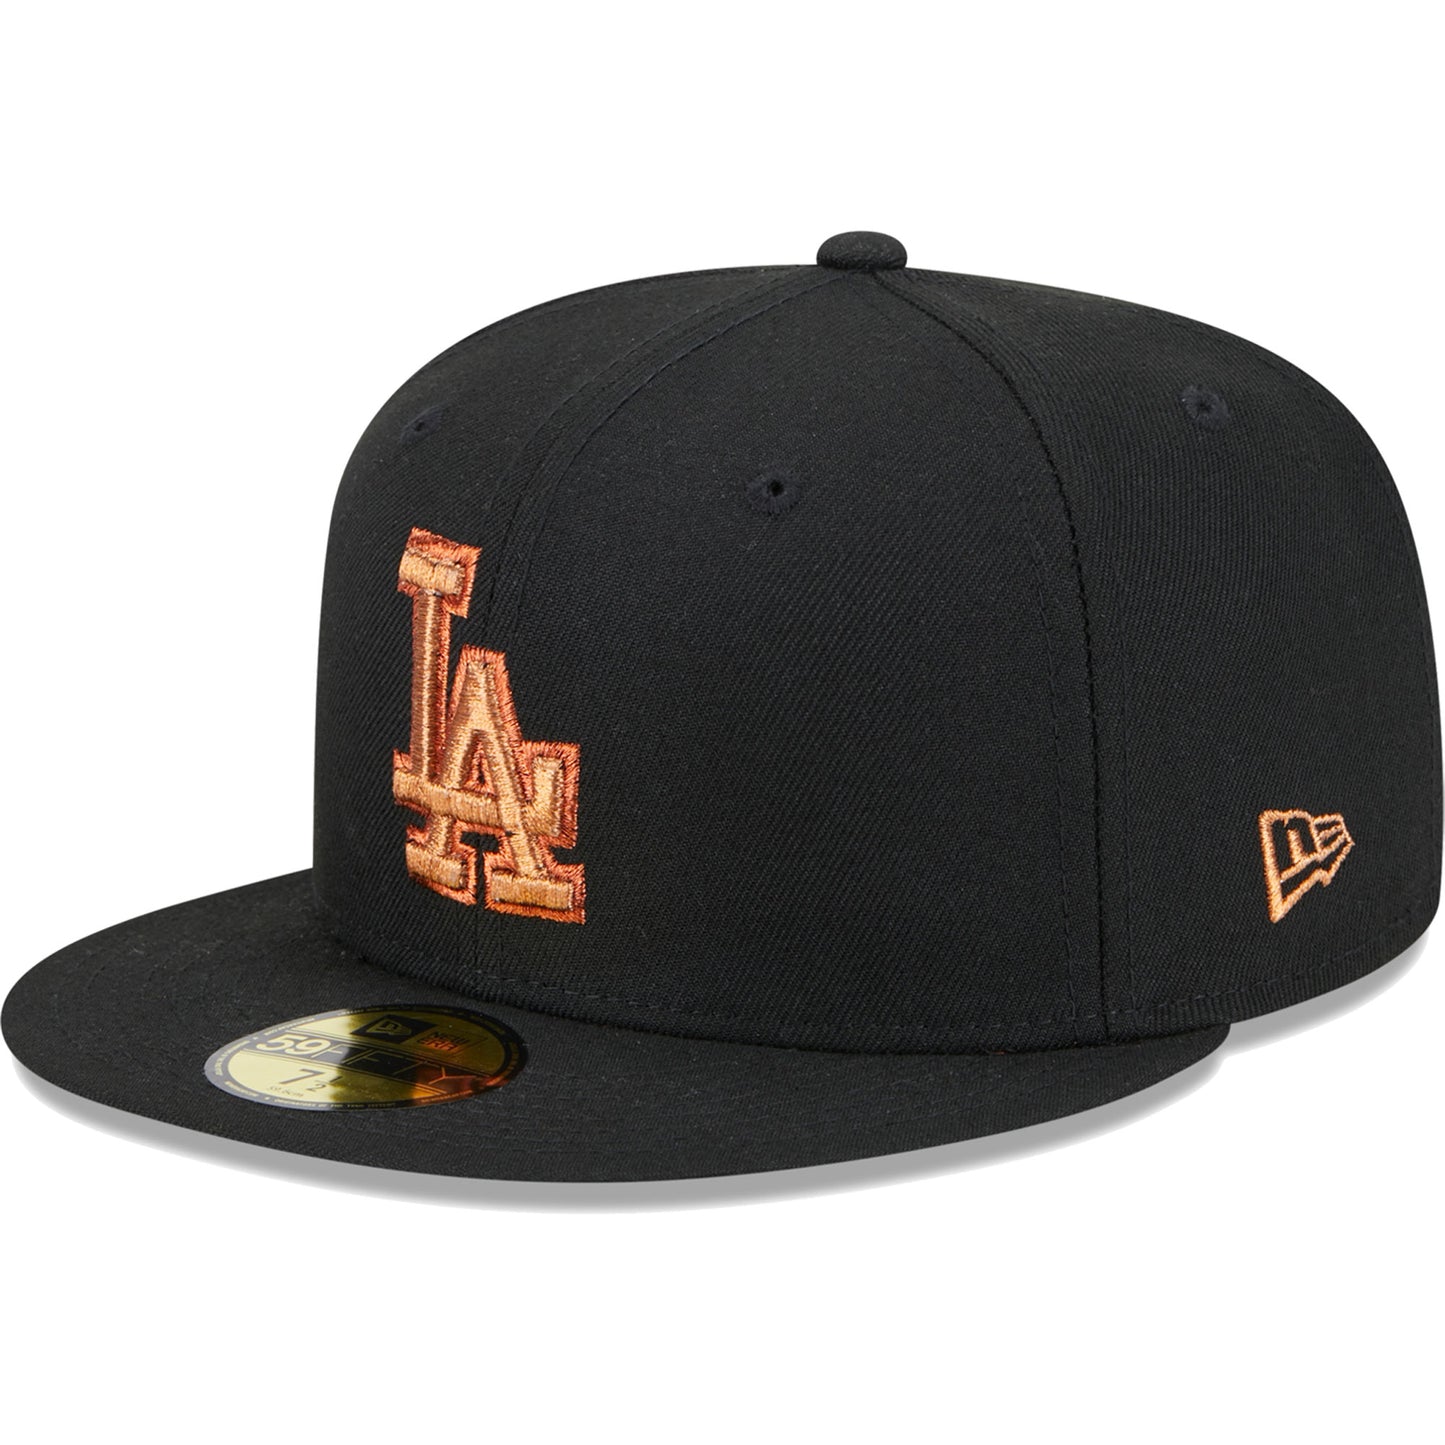 Los Angeles Dodgers New Era Metallic Pop 59FIFTY Fitted Hat - Black